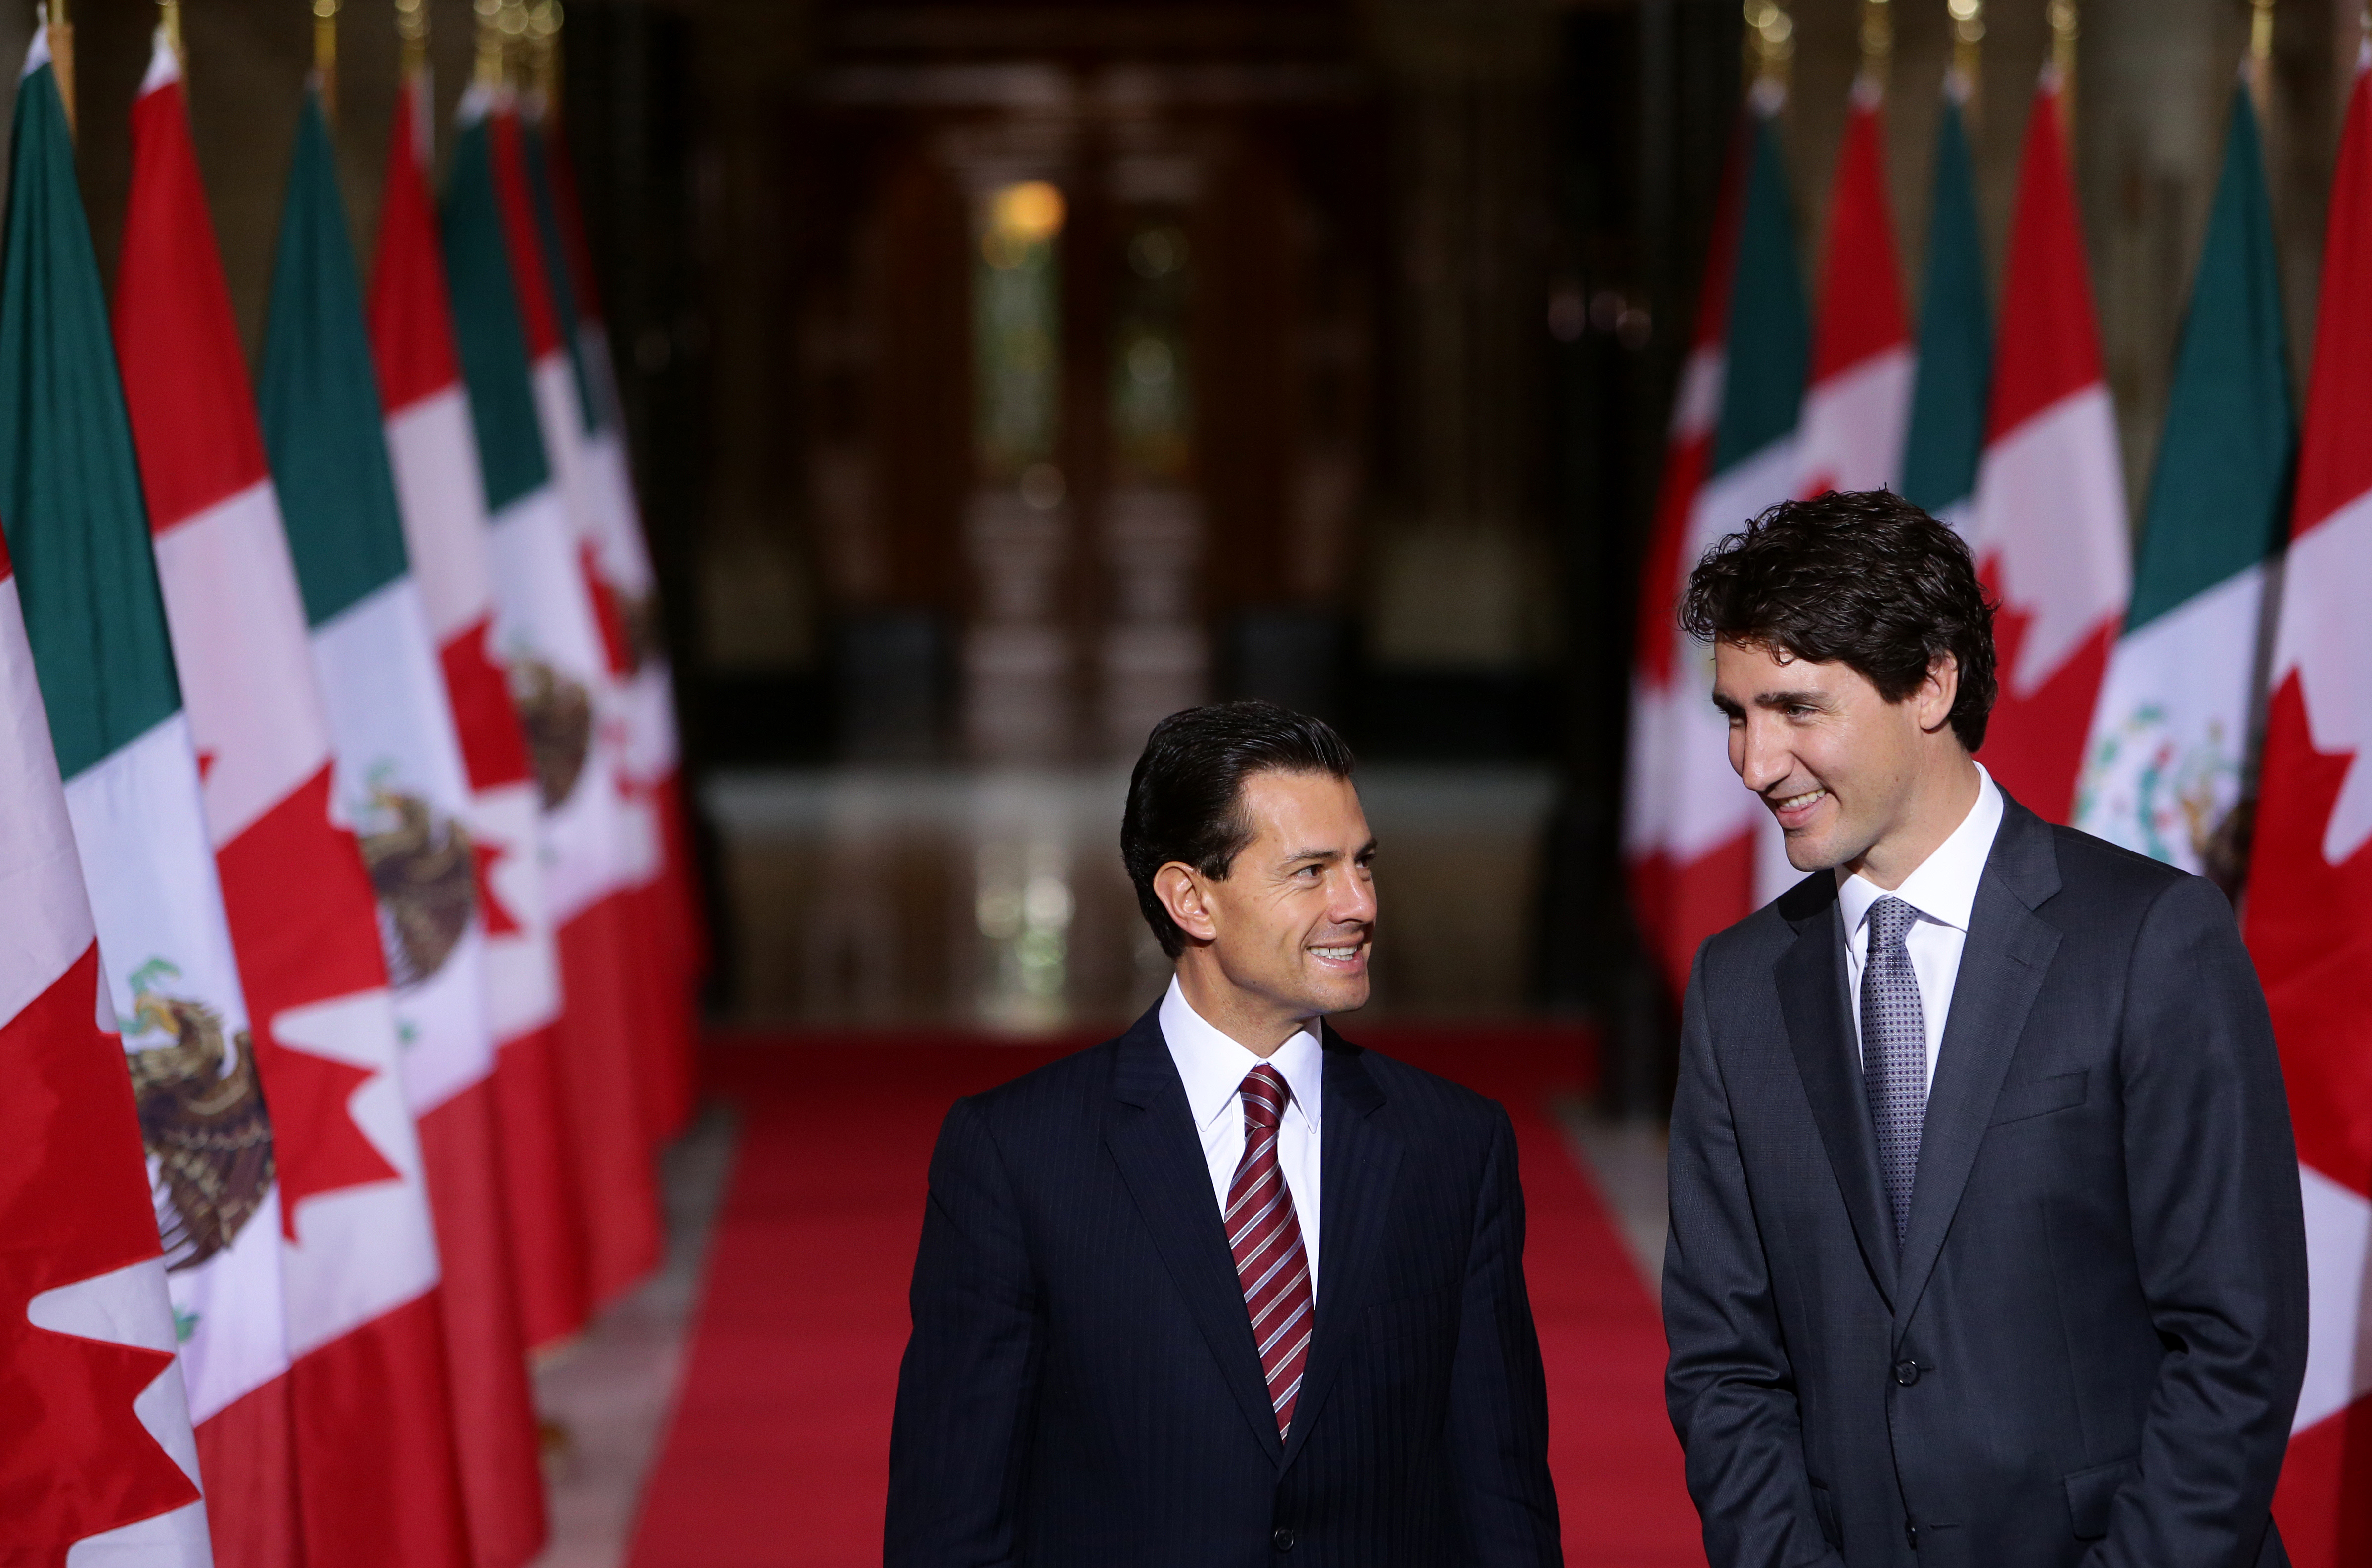 Justin Trudeau, Canada's prime minister, right, smiles with Enrique Pena Nieto, Mexico's president, in the Hall of Honour at Parliament Hill ahead of the North American Leaders Summit (NALS) in Ottawa, Ontario, Canada, on June 28, 2016. (Bloomberg/Getty Images)